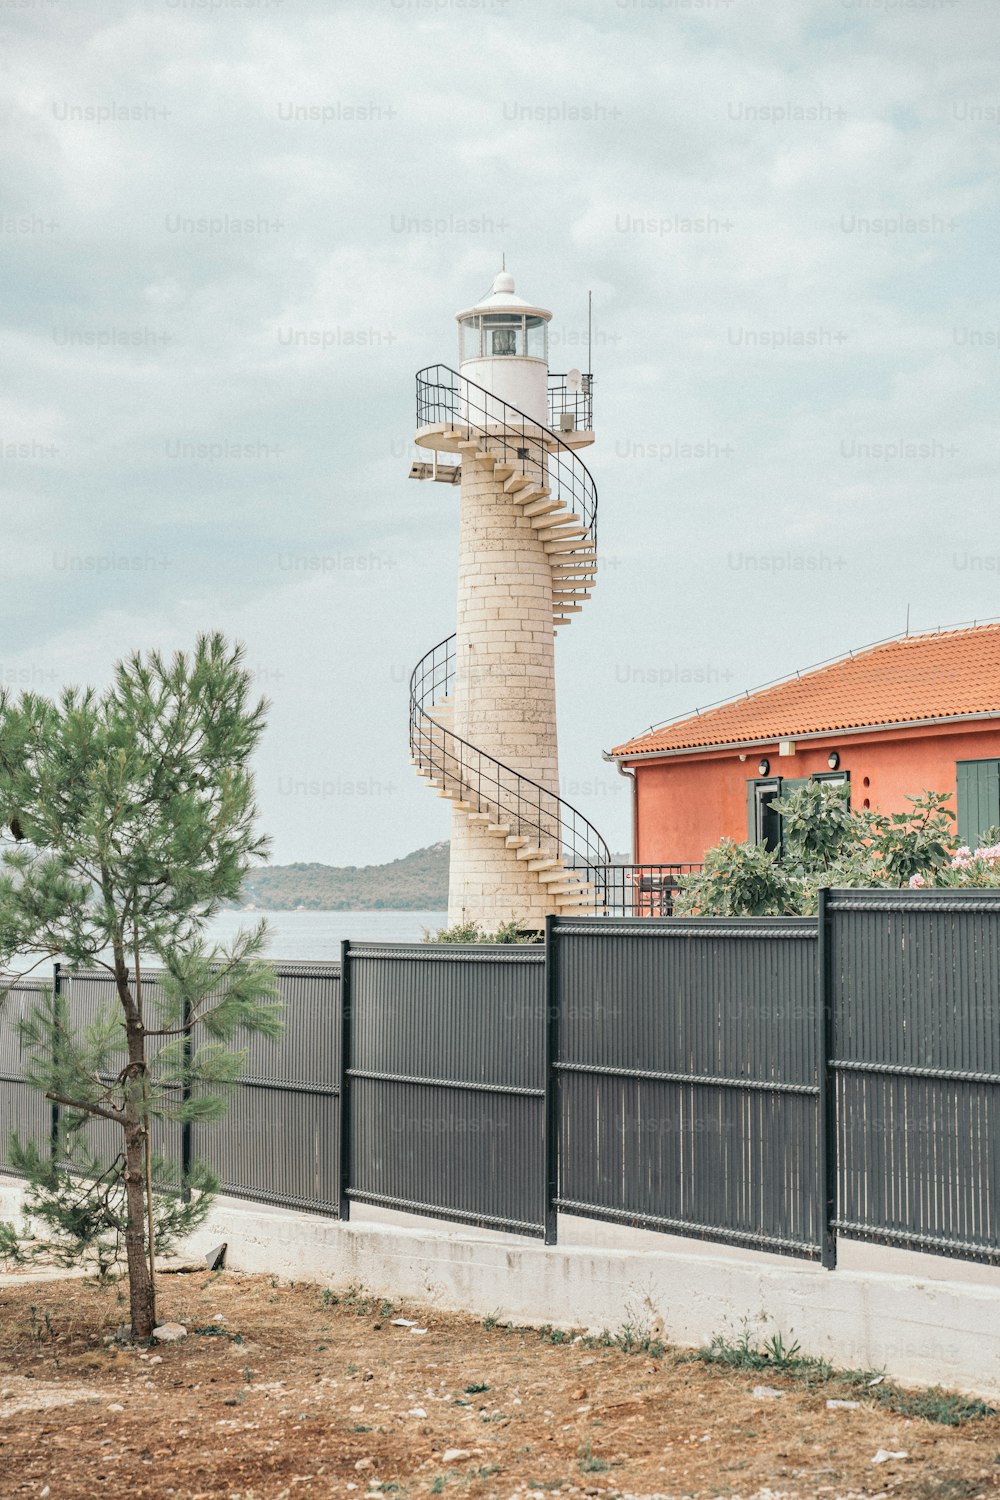 a tall tower with a spiral staircase next to a fence